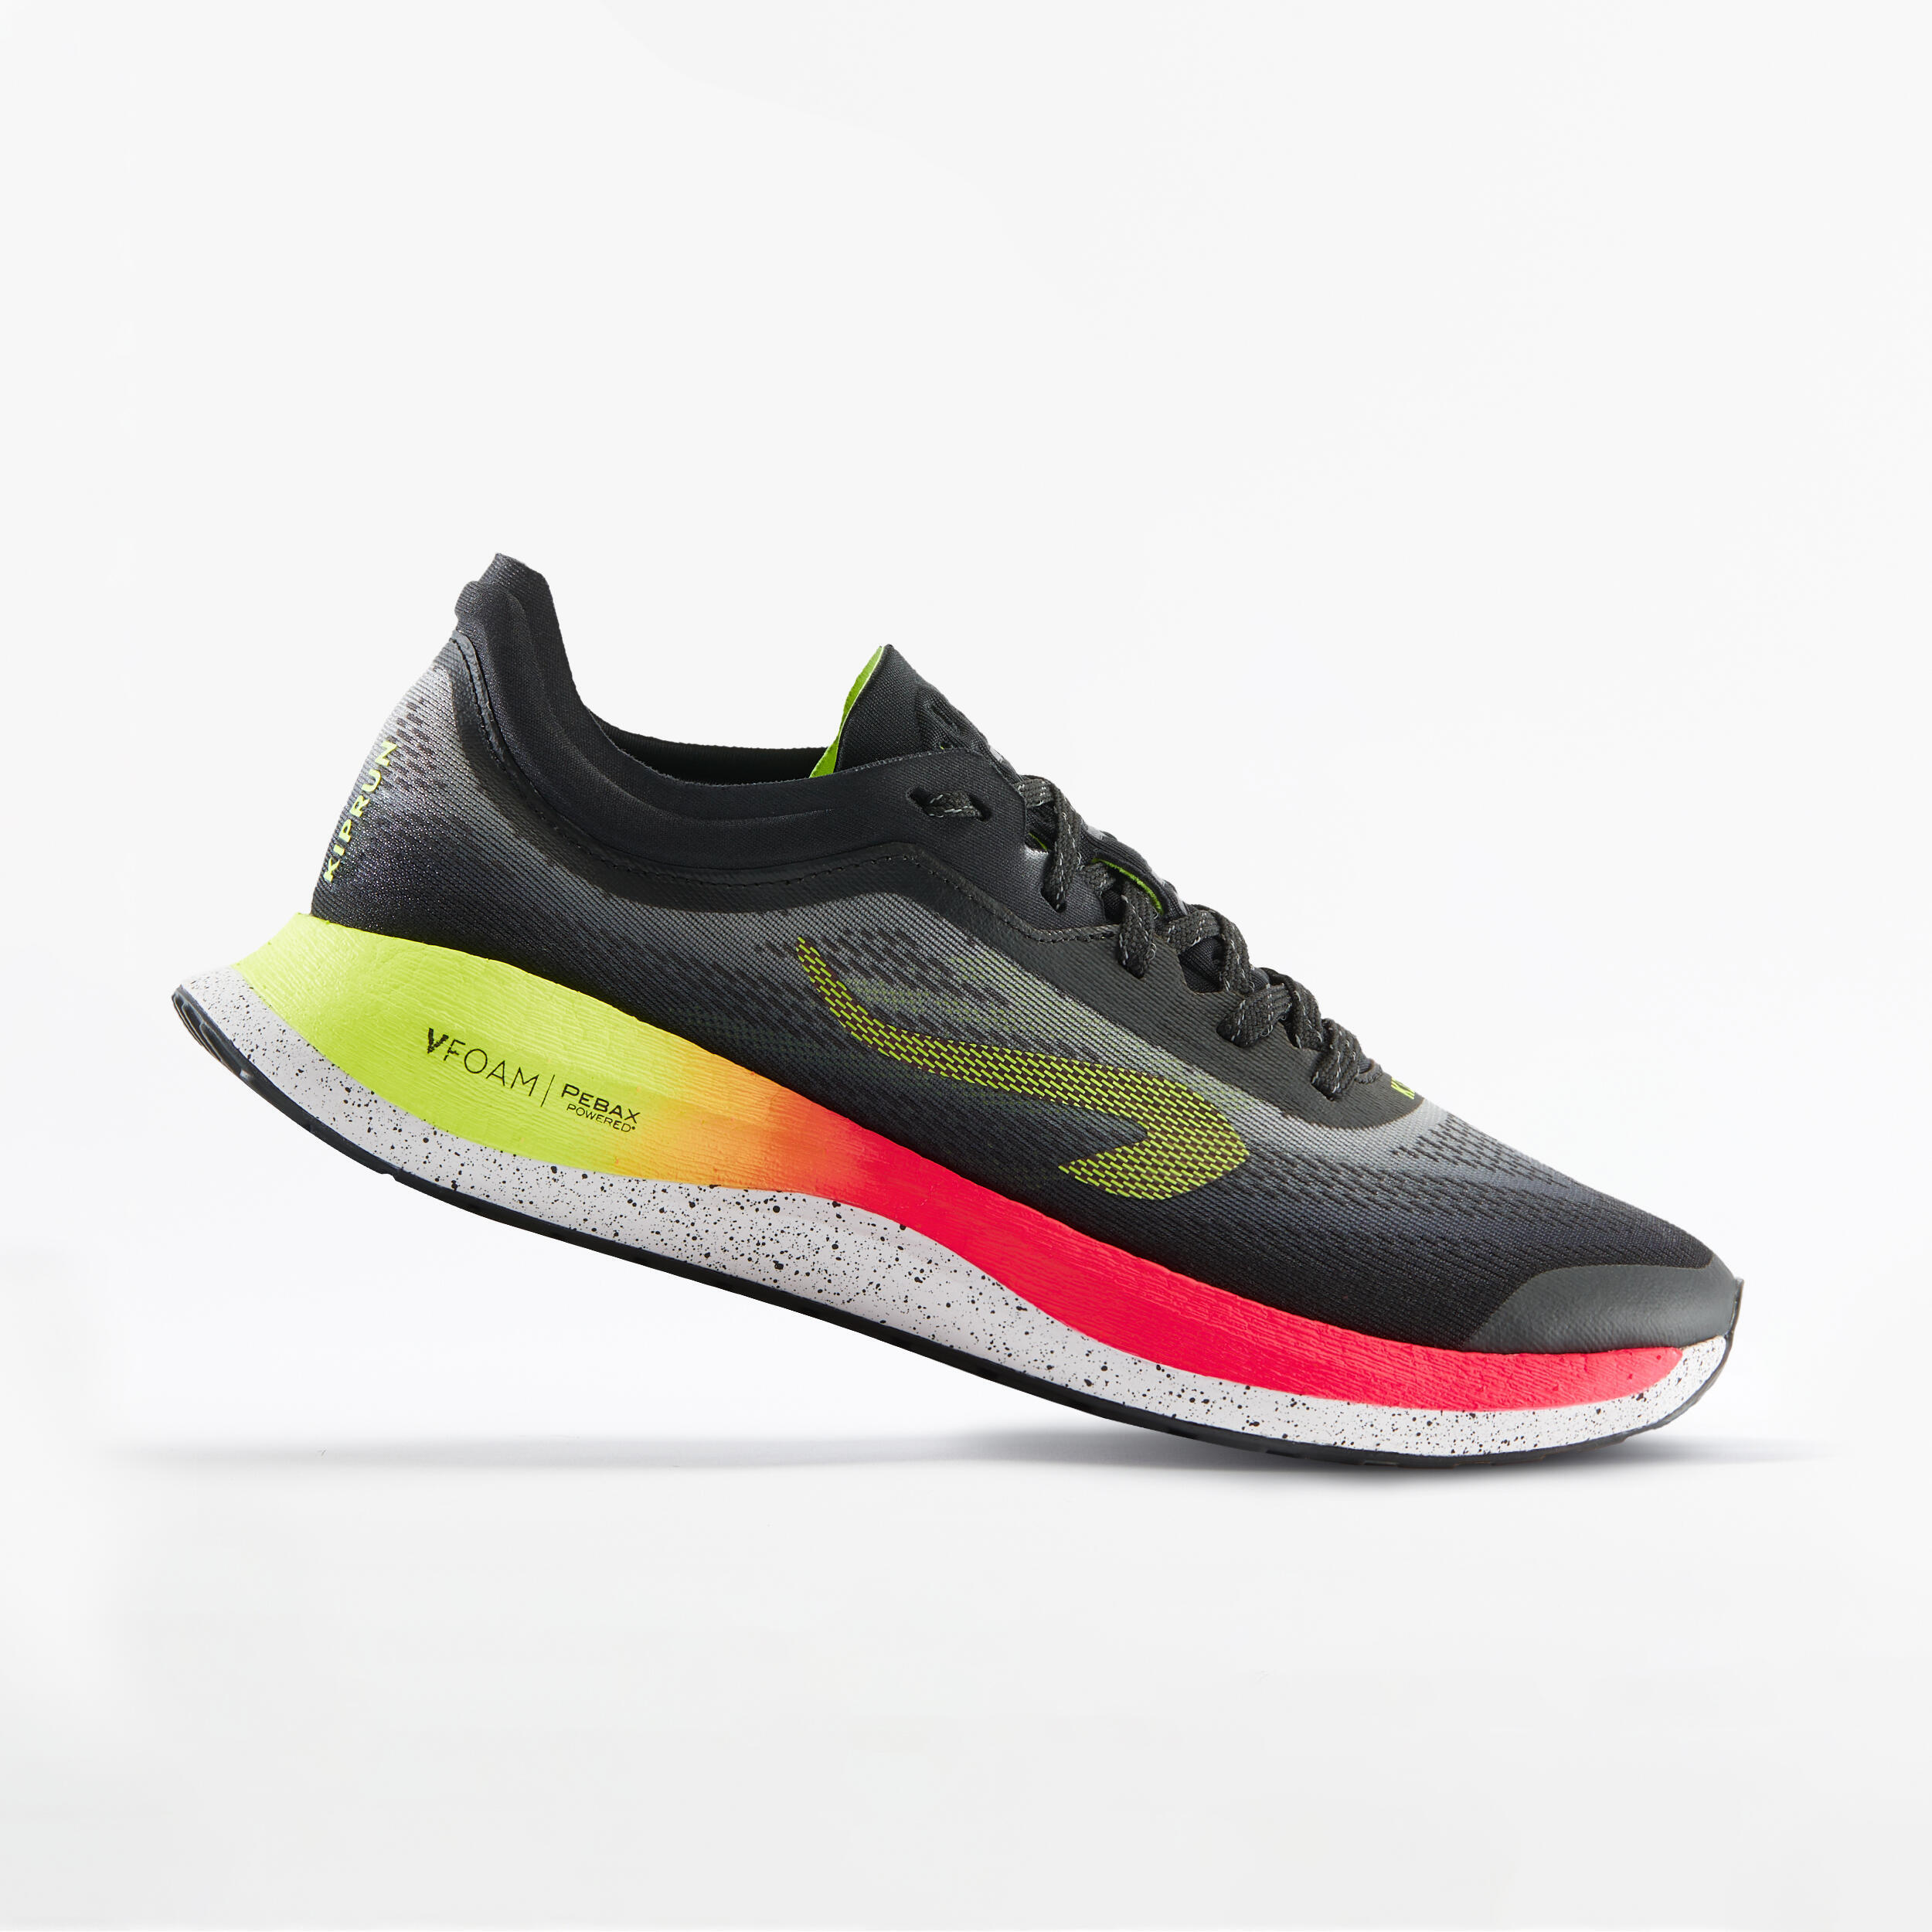 smoked black / fluo ultra pink / fluo lime yellow